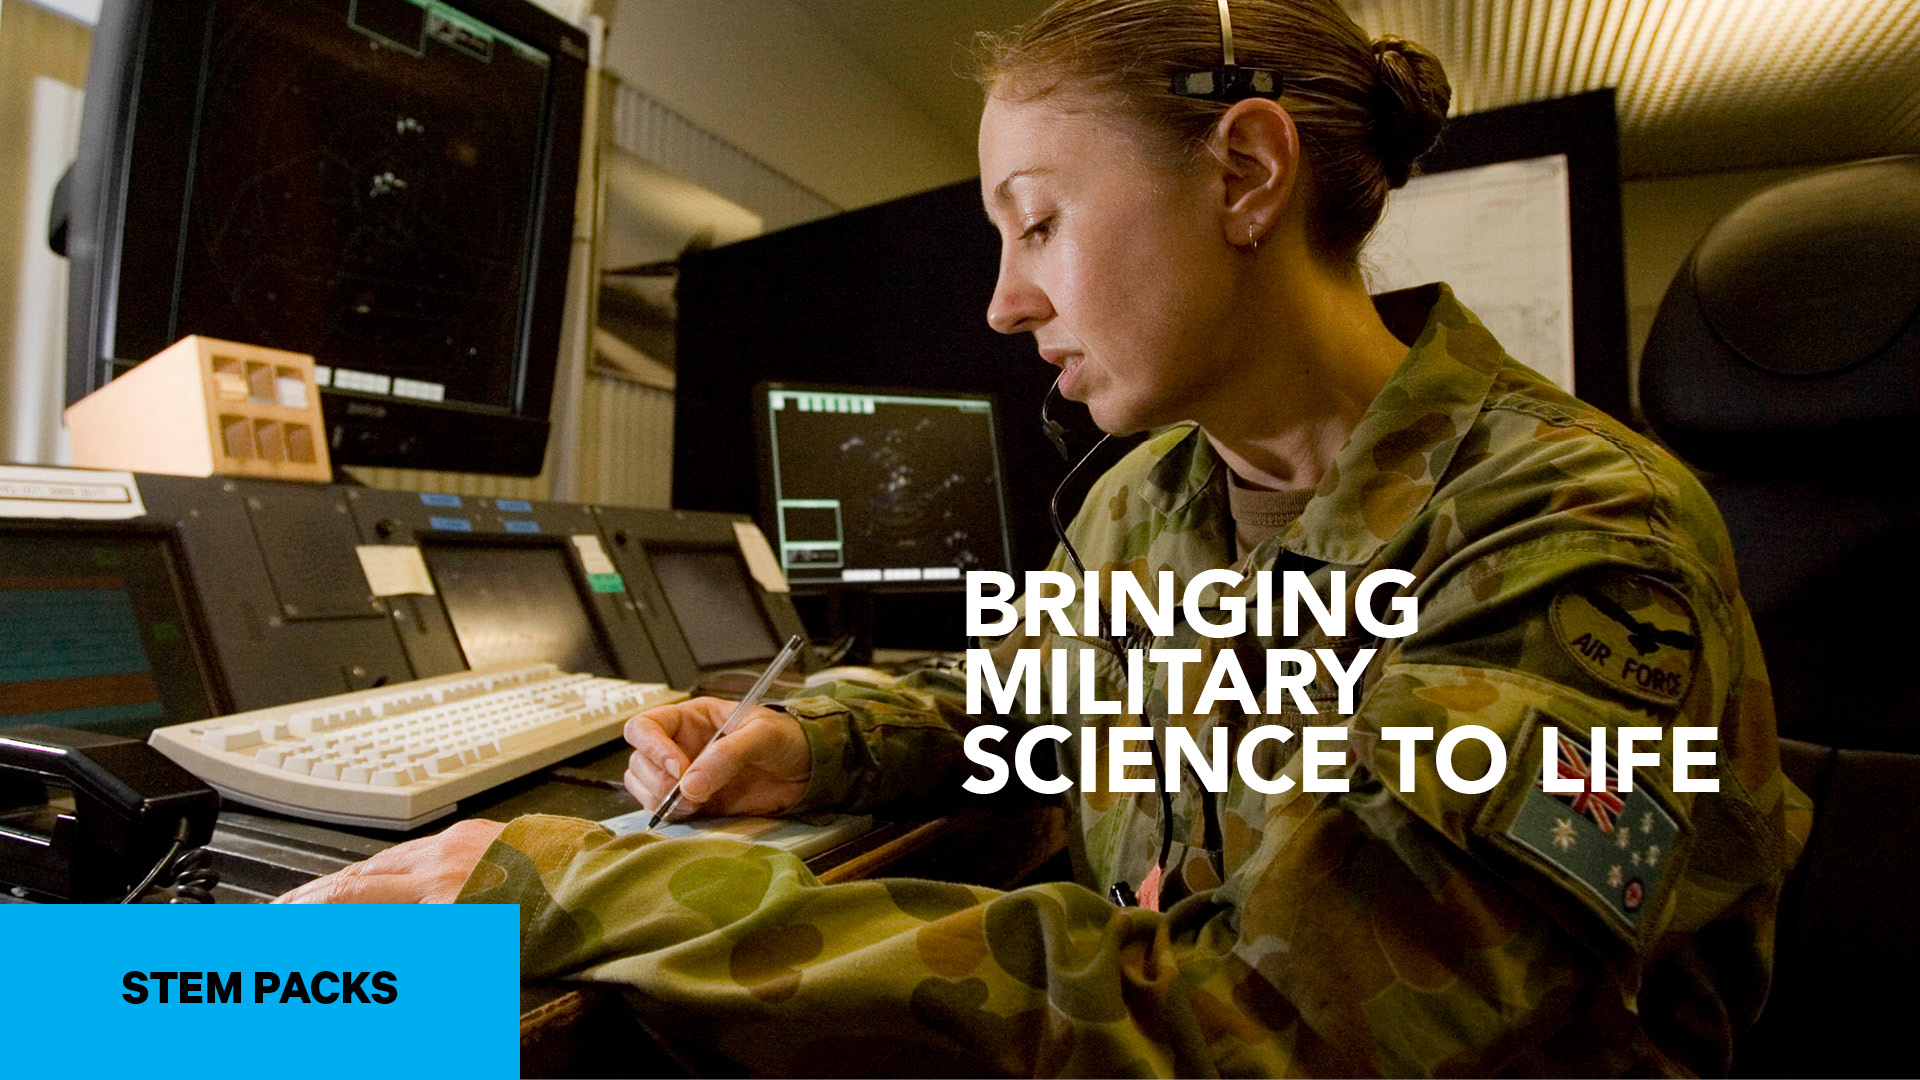 STEM Pack 2: Bringing Military Science to Life